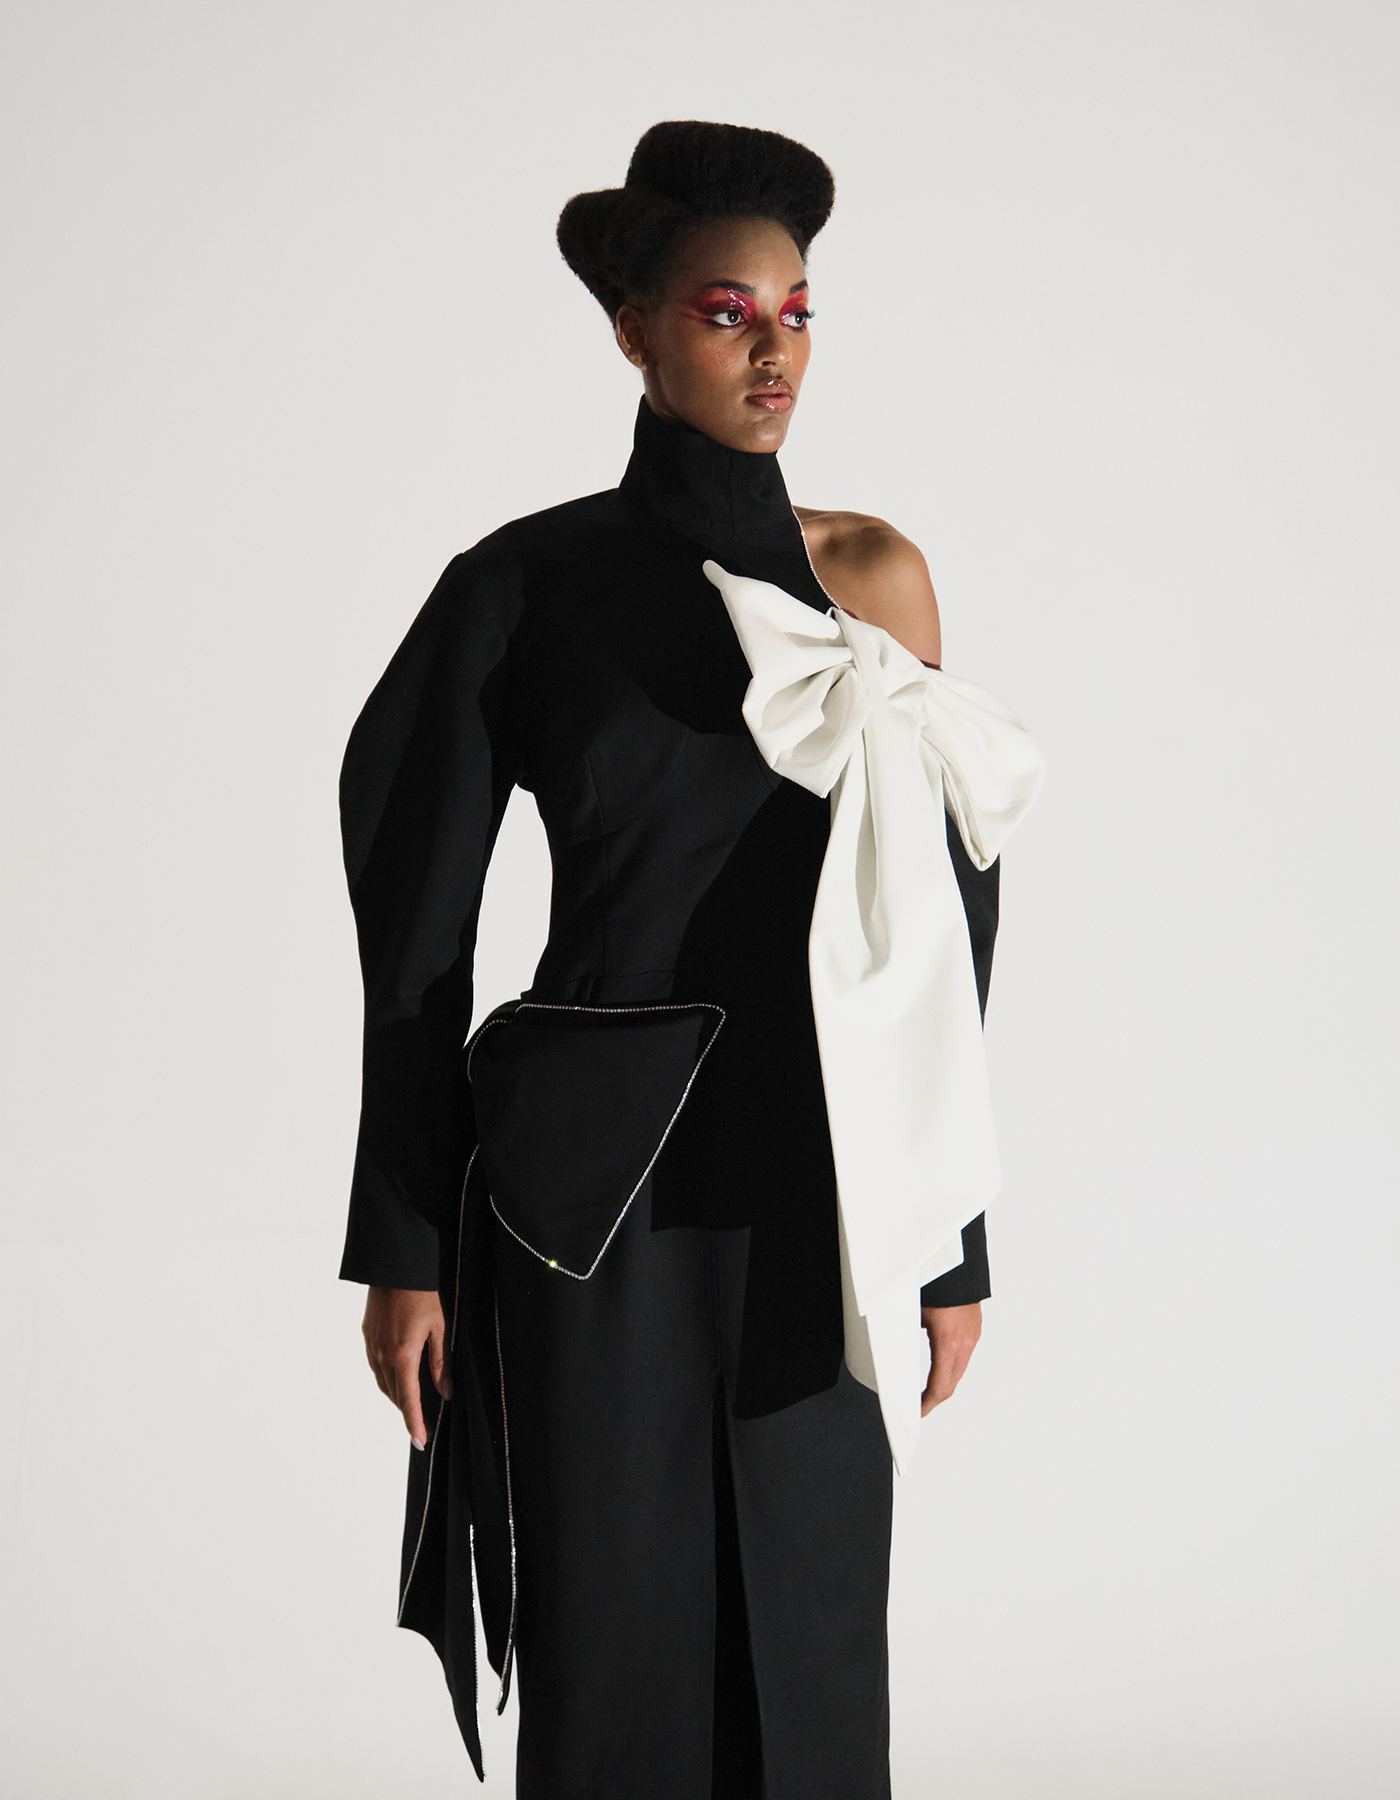 SS22. Black turtleneck dress with bows